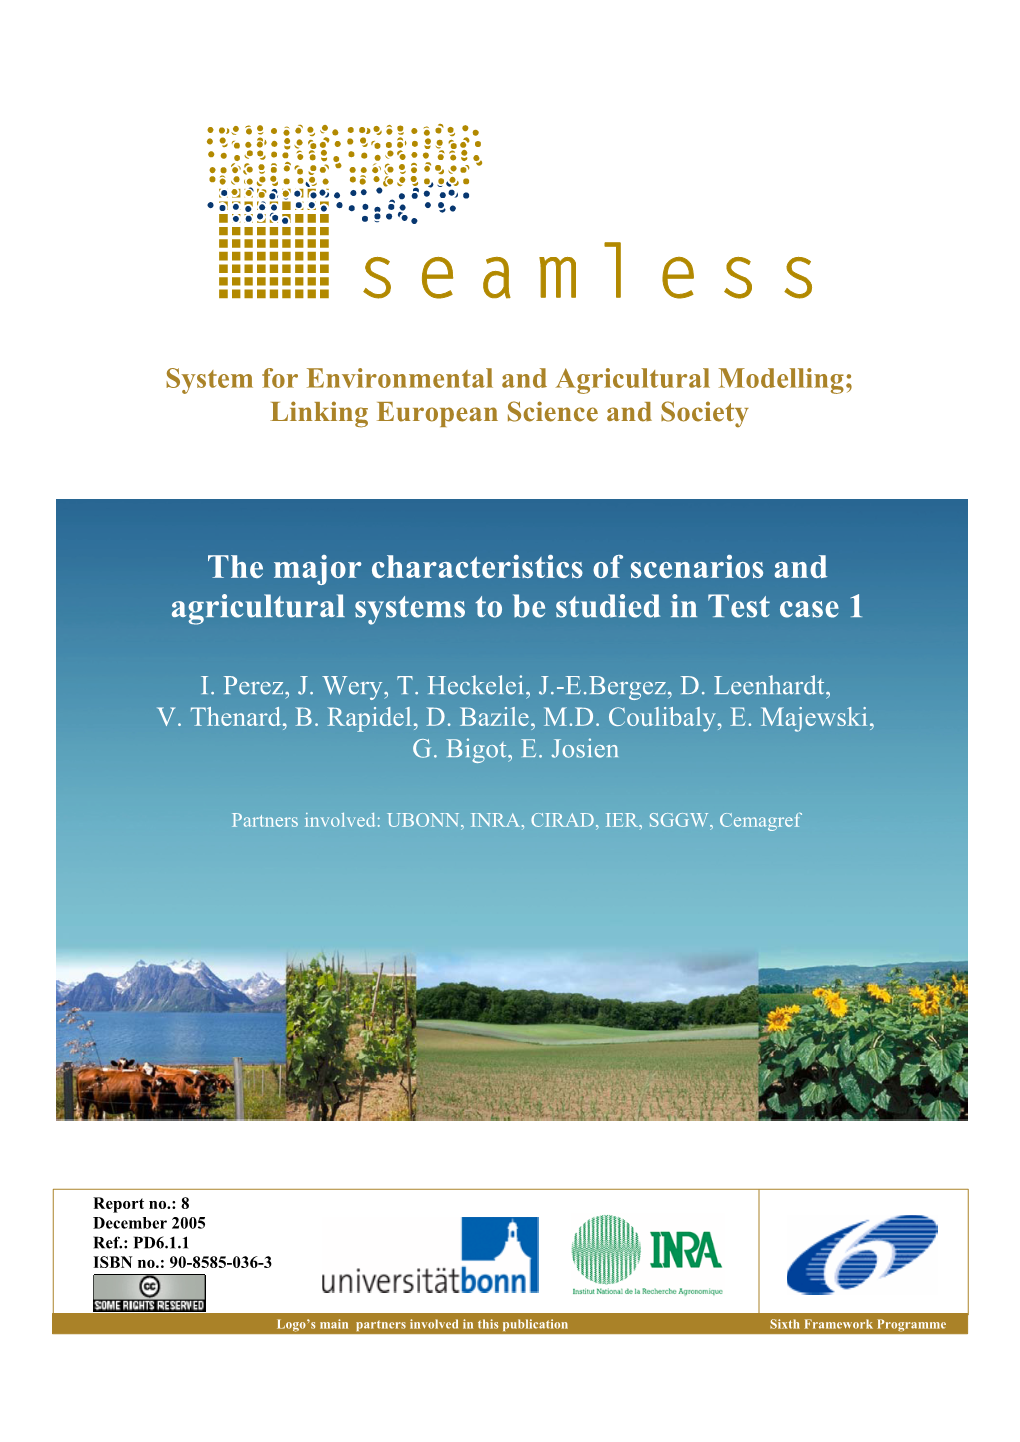 The Major Characteristics of Scenarios and Agricultural Systems to Be Studied in Test Case 1